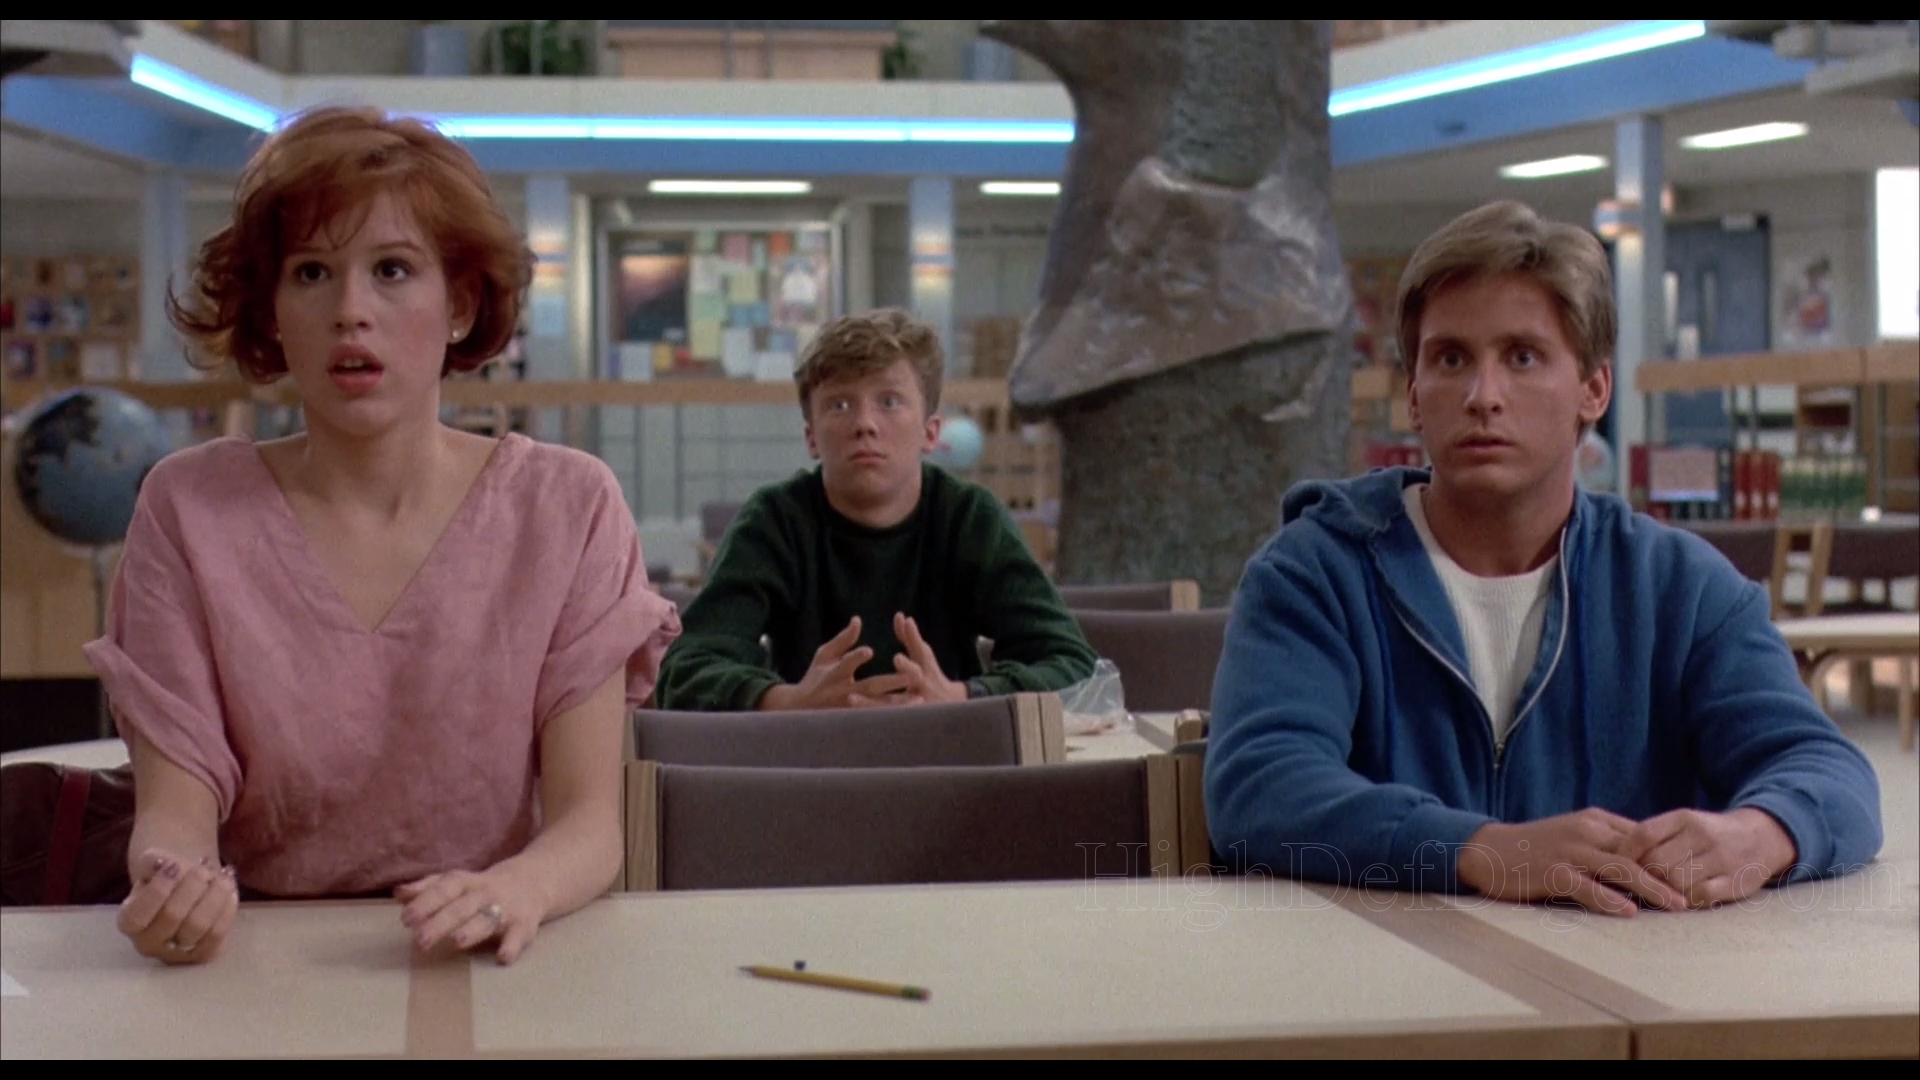 The Breakfast Club: 30th Anniversary Edition Blu-ray Review | High ...